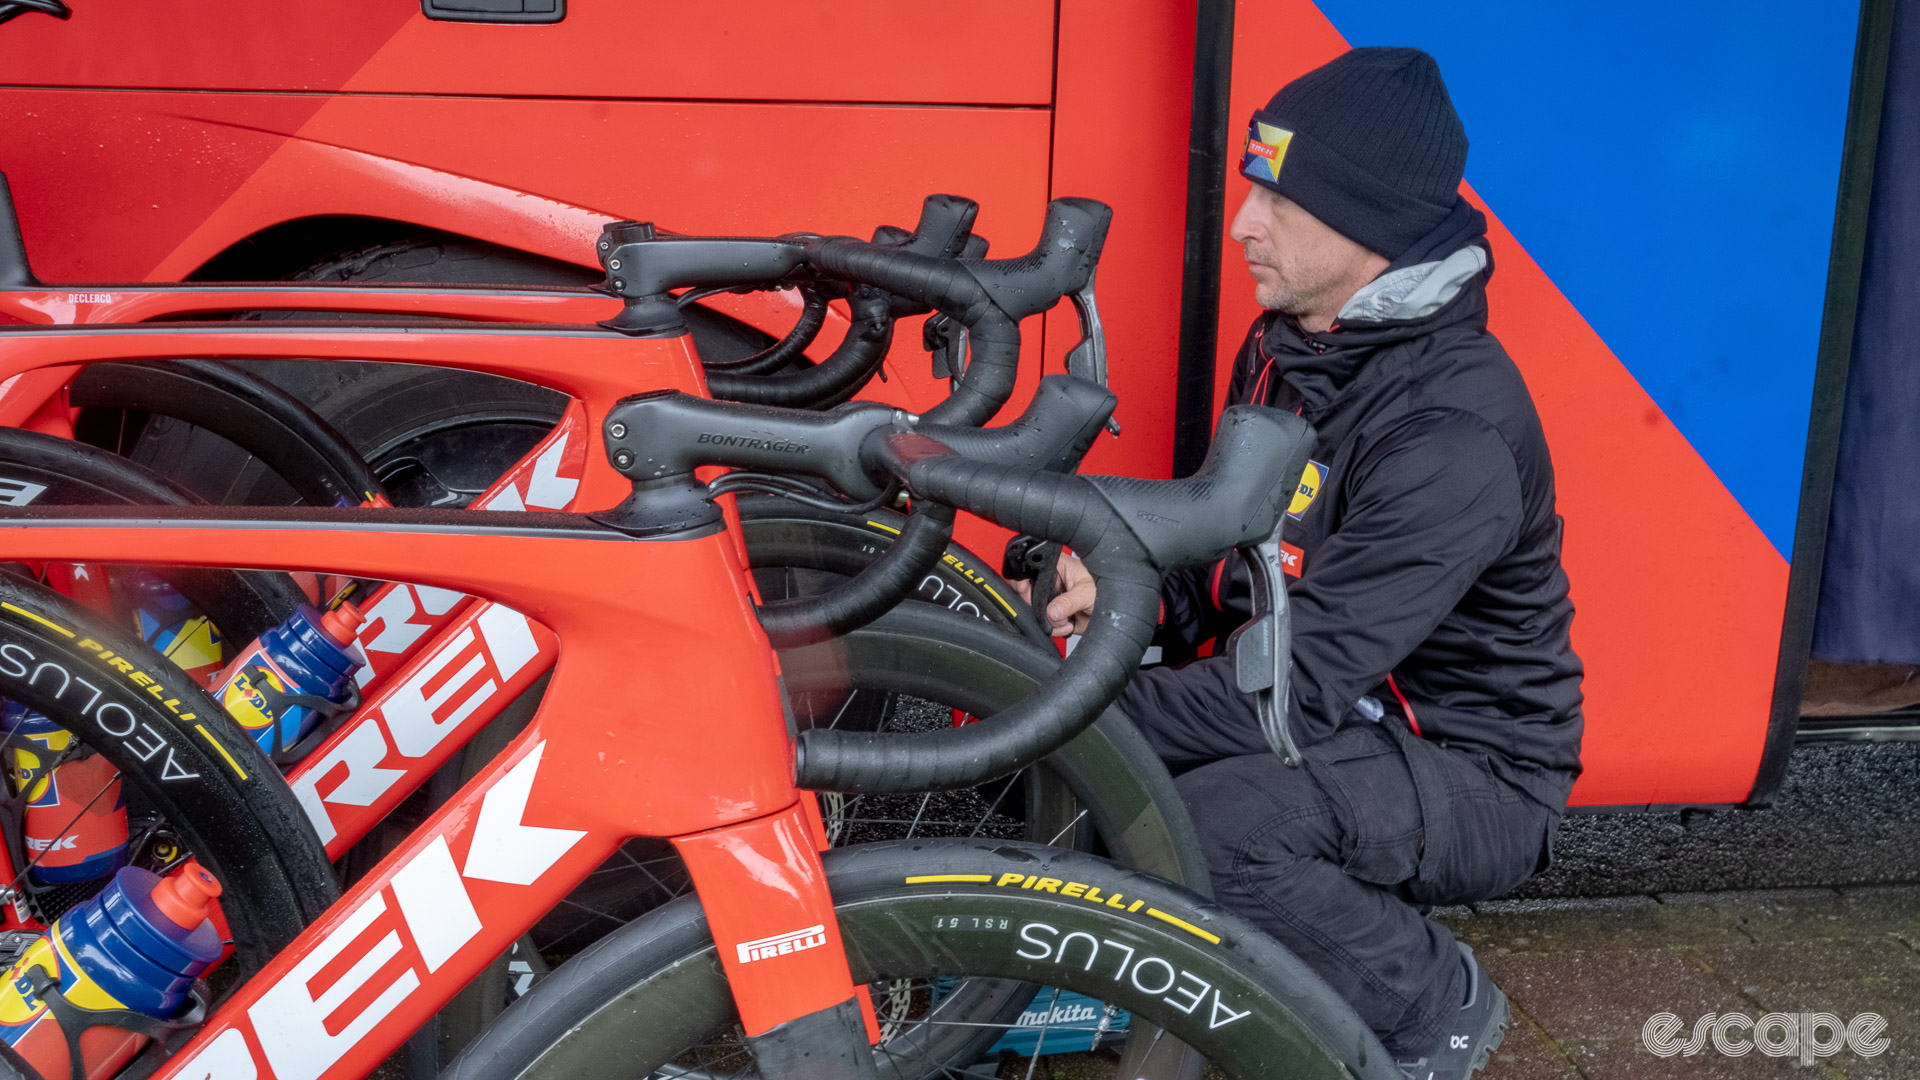 The image shows a Lidl-Trek mechanic and two Trek Madone bikes. The mechanic is checking tyre pressure on one bike.